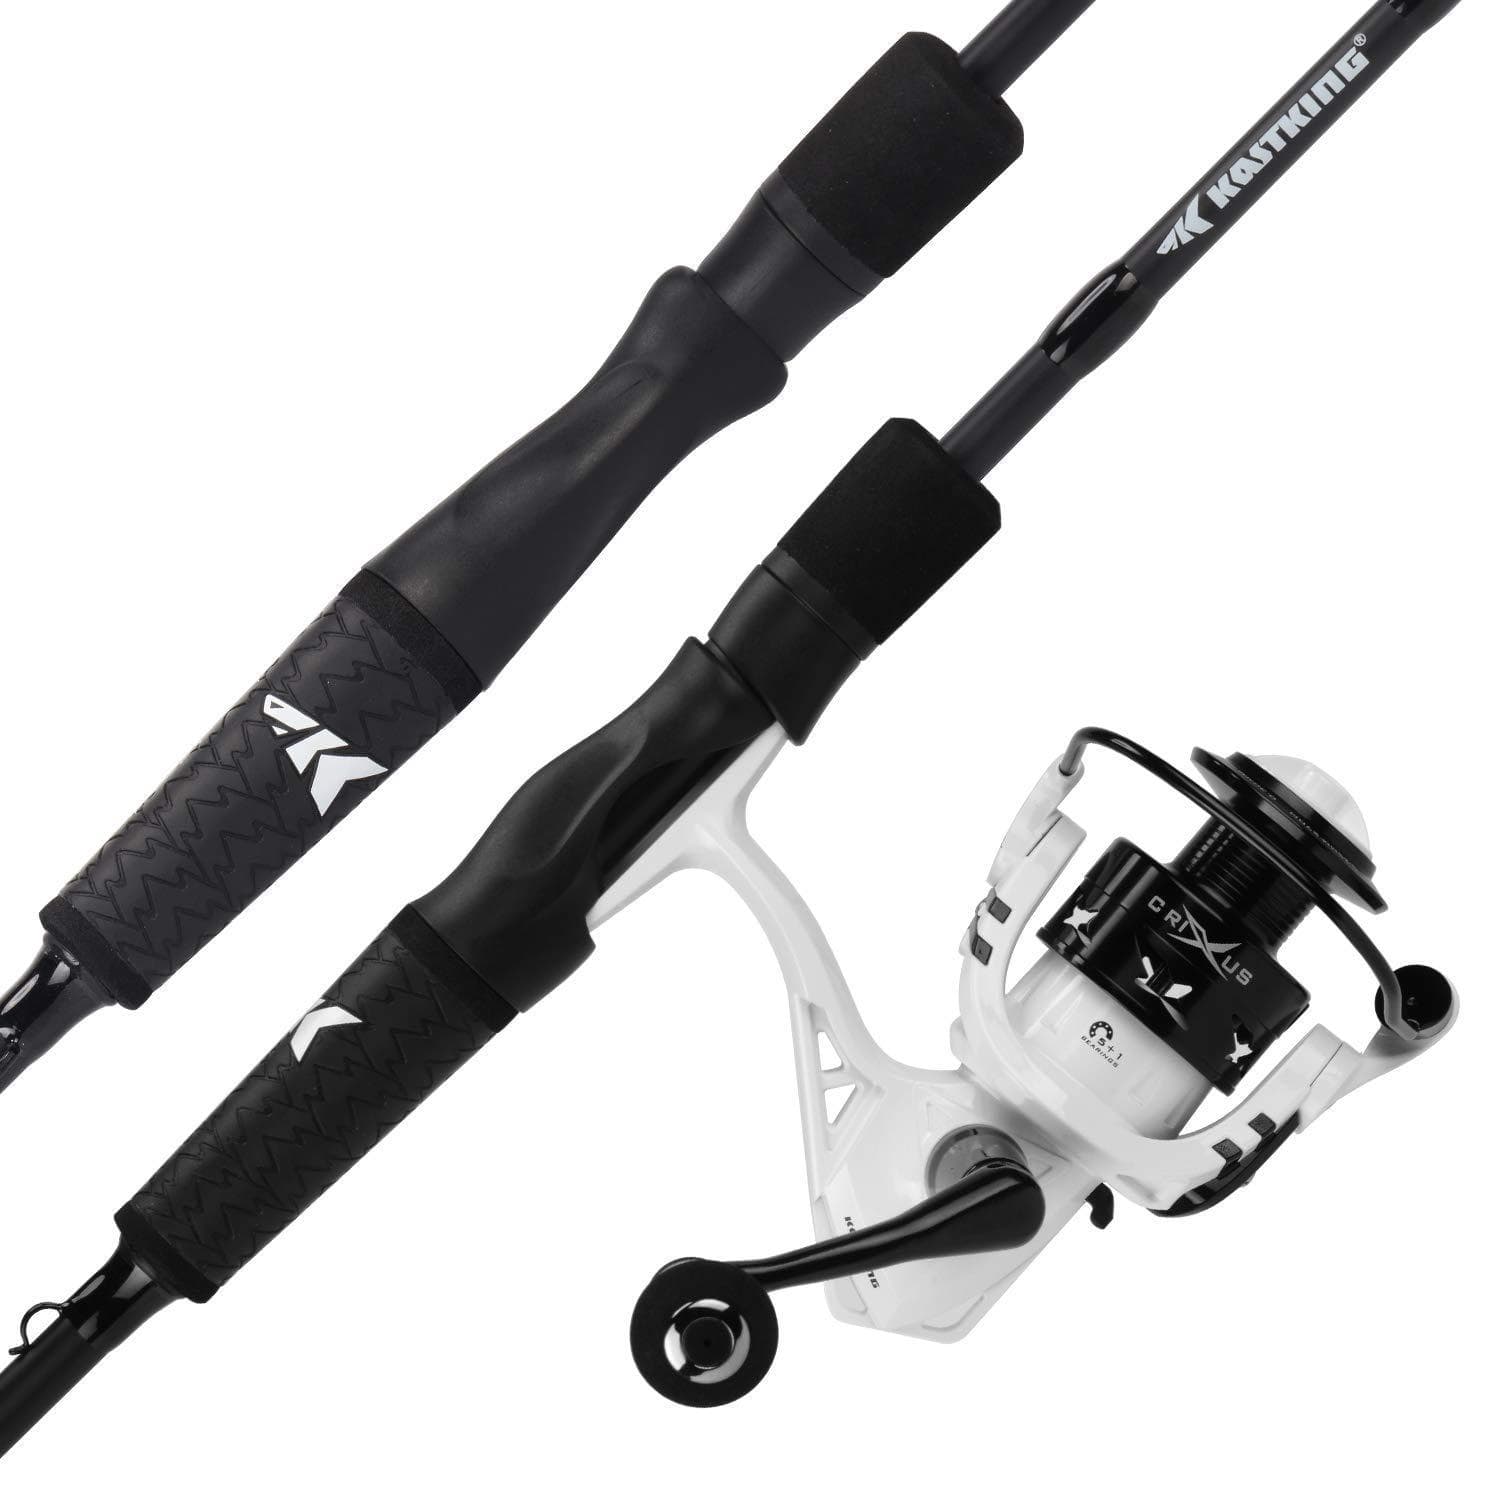 Ganis Angling World - KASTKING CRIXUS WHITE Available from R 1040.00:  www.ganis.co.za/pi32561/ci71/fishing-reels/all-fishing-reels/low-profile- bait-casting-reels/kastking-crixus-white.html Low Profile Baitcasting  Fishing Reel– Fish like a gladiator